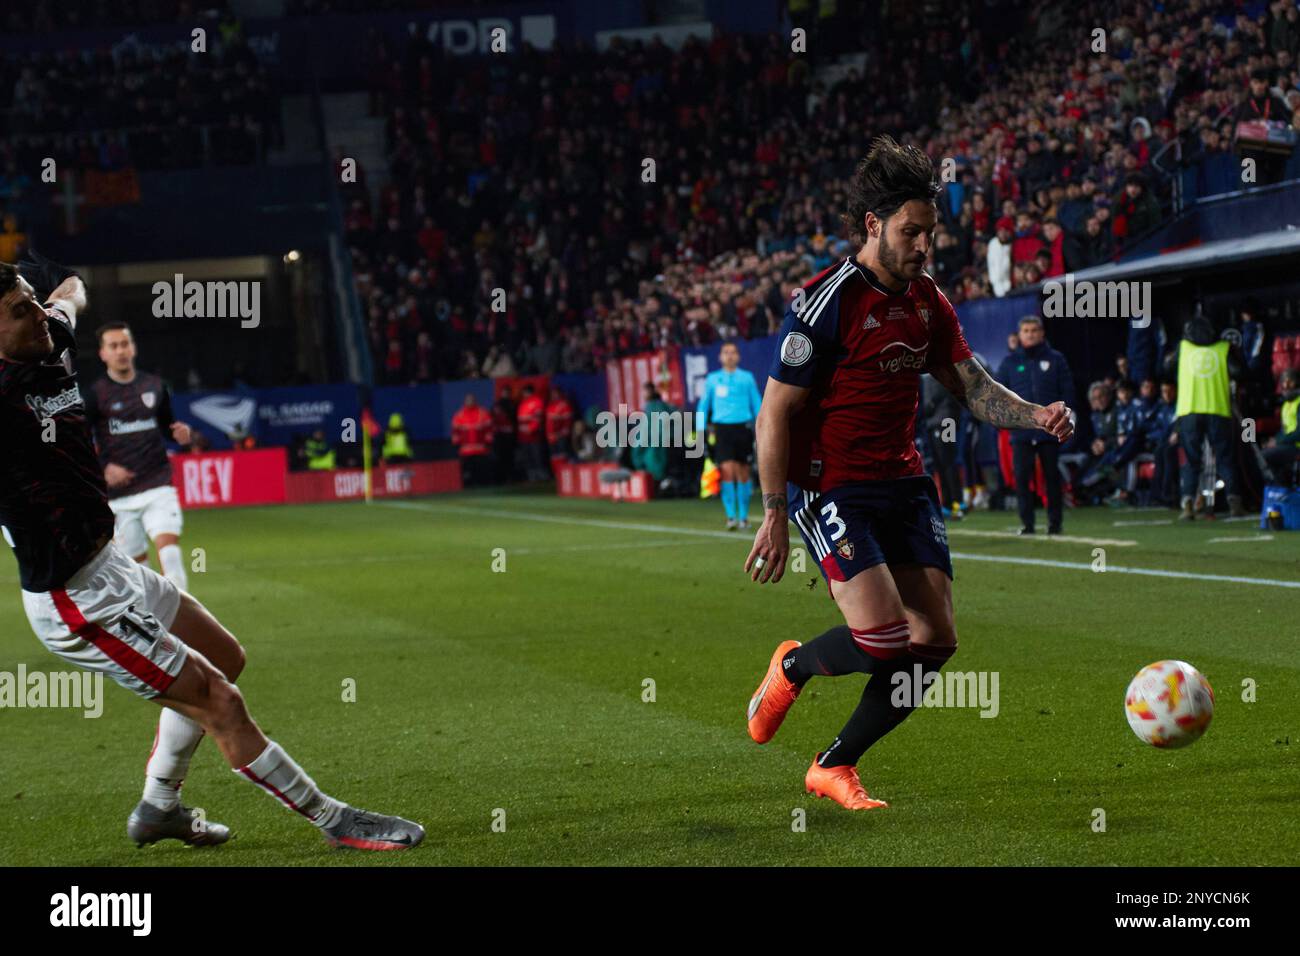 Pamplona, Spain. 1st Mar. 2023. Sports. Football/Soccer. De Marcos (18. Athletic Club) and Juan Cruz (3. CA Osasuna) during the first leg football match of the semifinal of the Copa del Rey between CA Osasuna and Athletic Club played at El Sadar stadium in Pamplona (Spain) on March 1, 2023. Credit: Iñigo Alzugaray/Alamy Live News Stock Photo